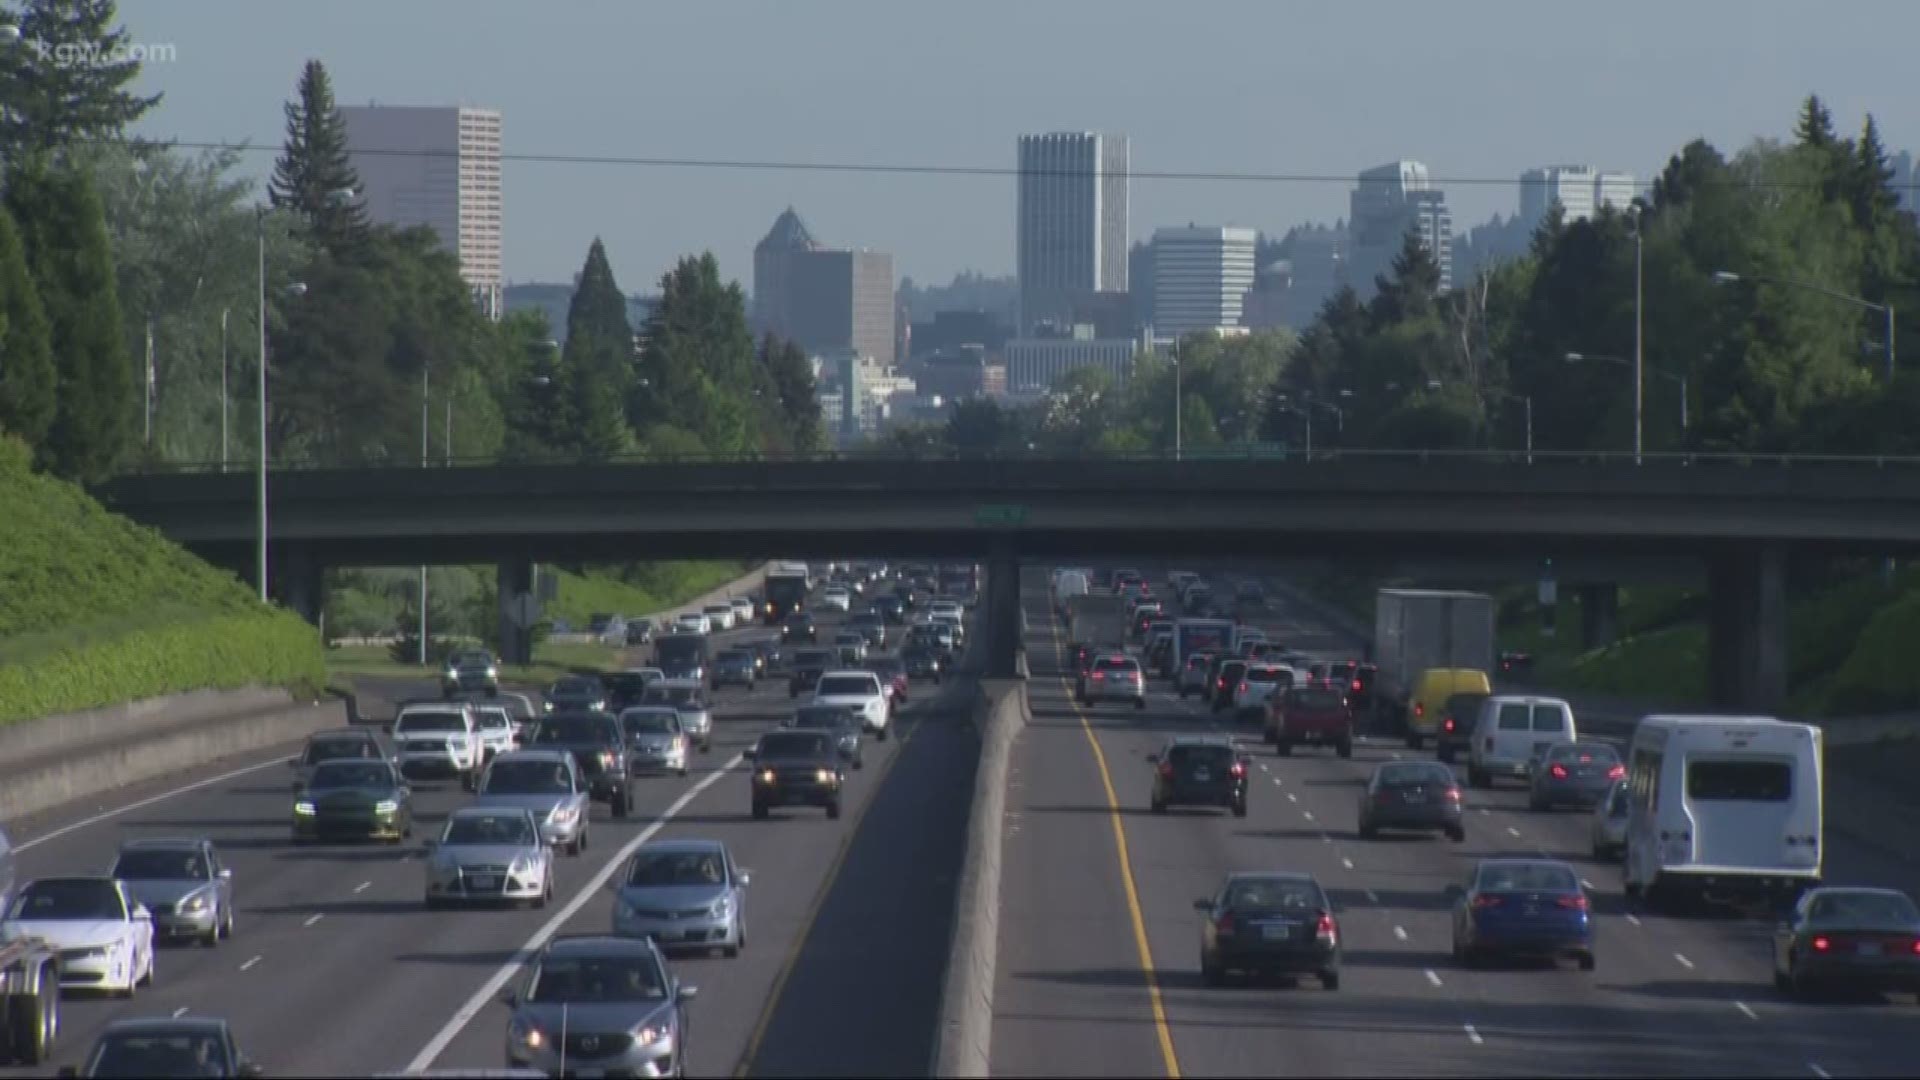 Tolling options recommend to ODOT